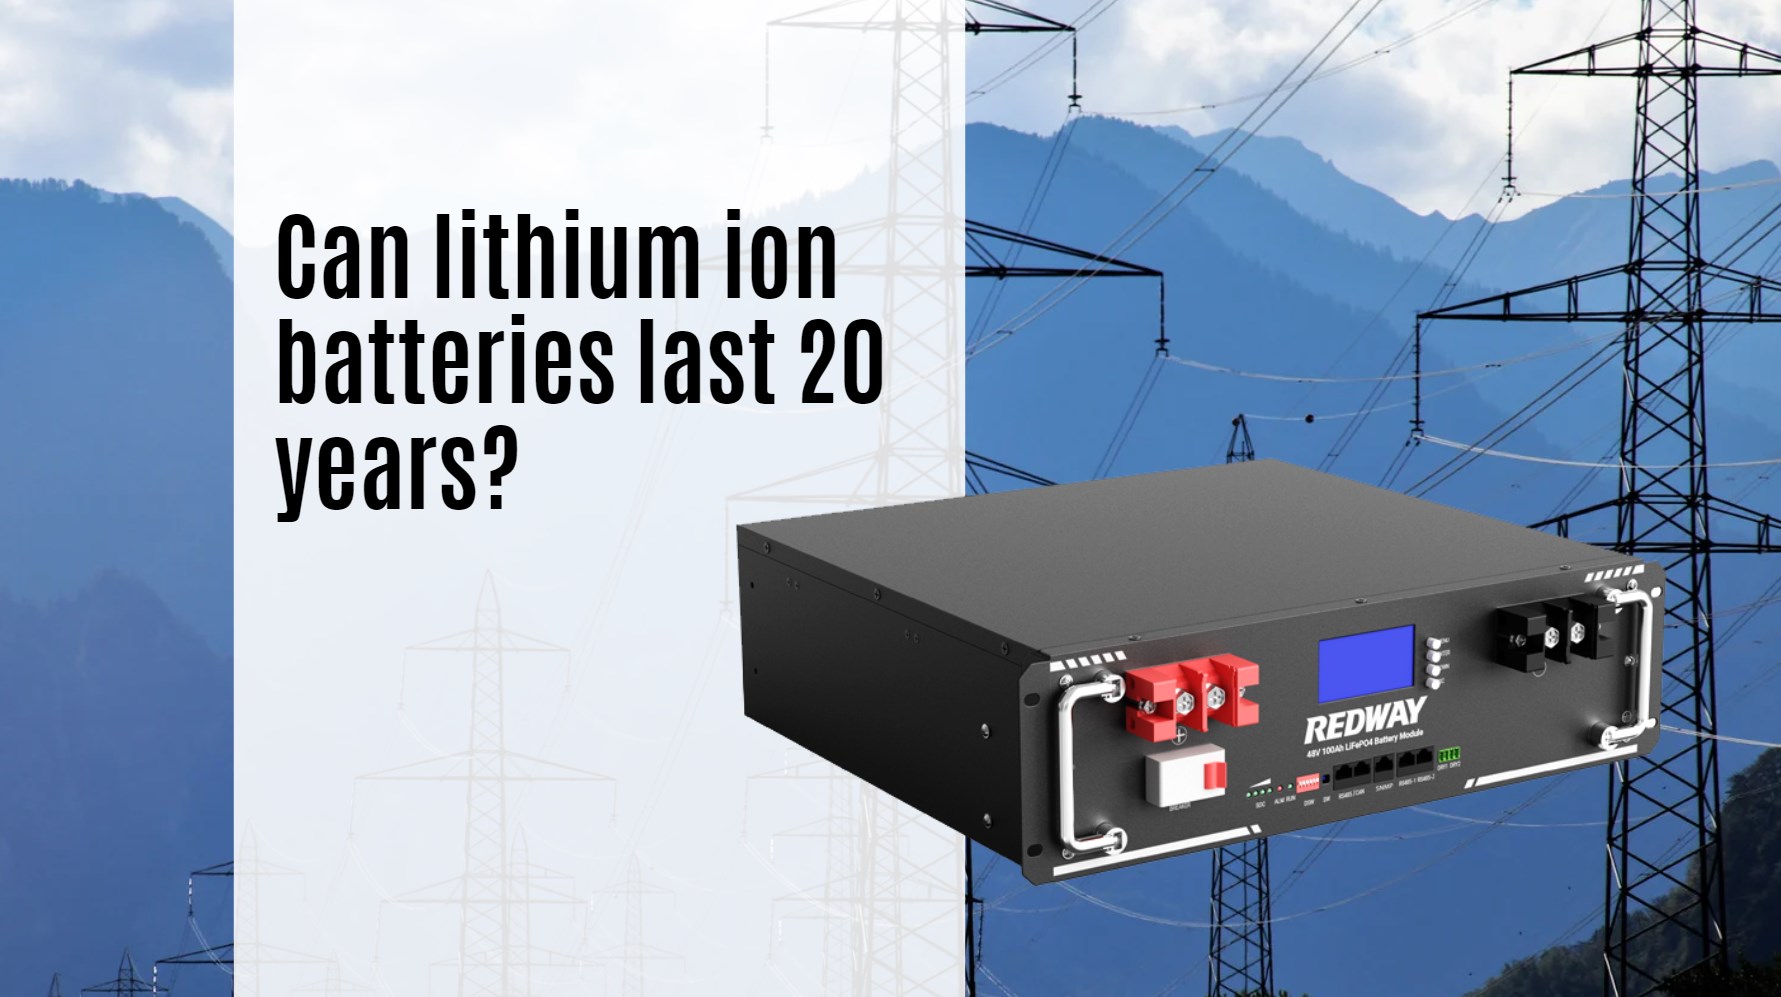 Can lithium ion batteries last 20 years?